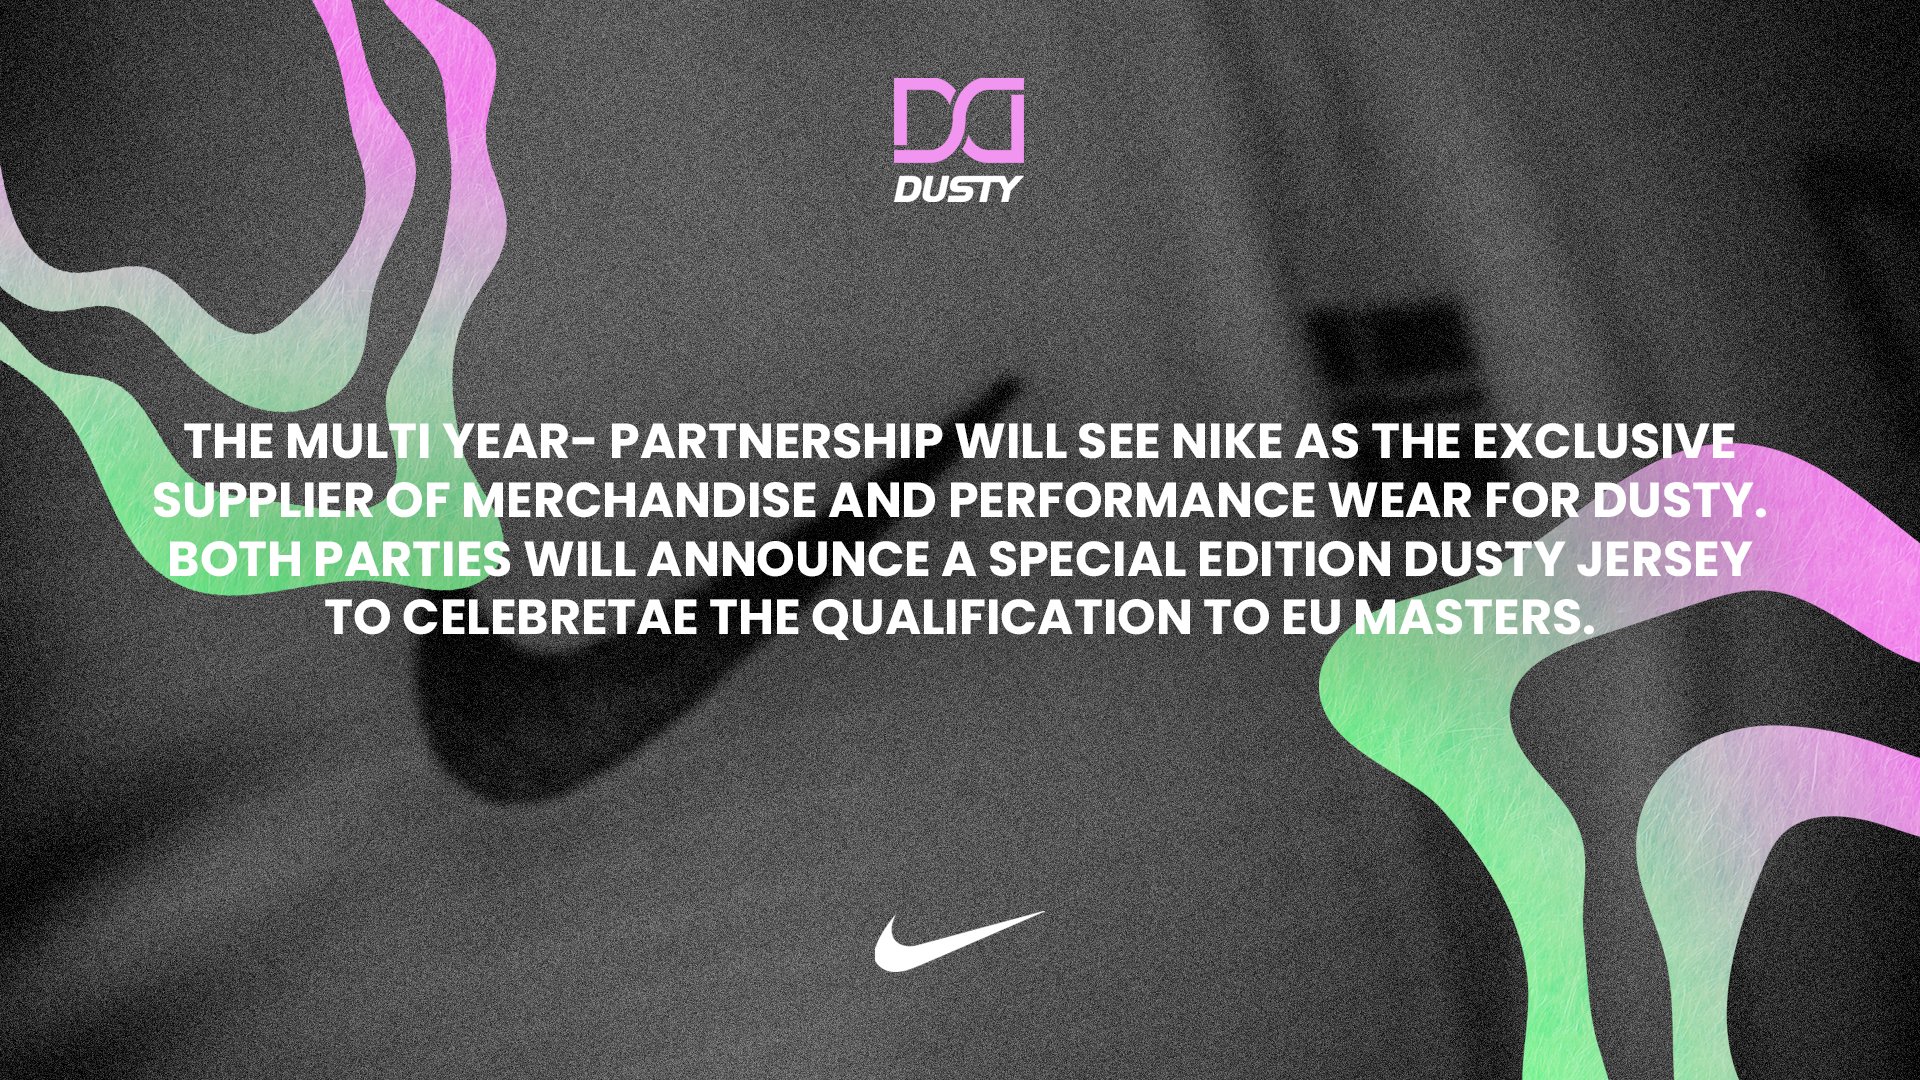 Legítimo Un evento profundo DUSTY on Twitter: "Dusty enters long-term sponsorship with Nike  https://t.co/7ctYY7Pdis" / Twitter